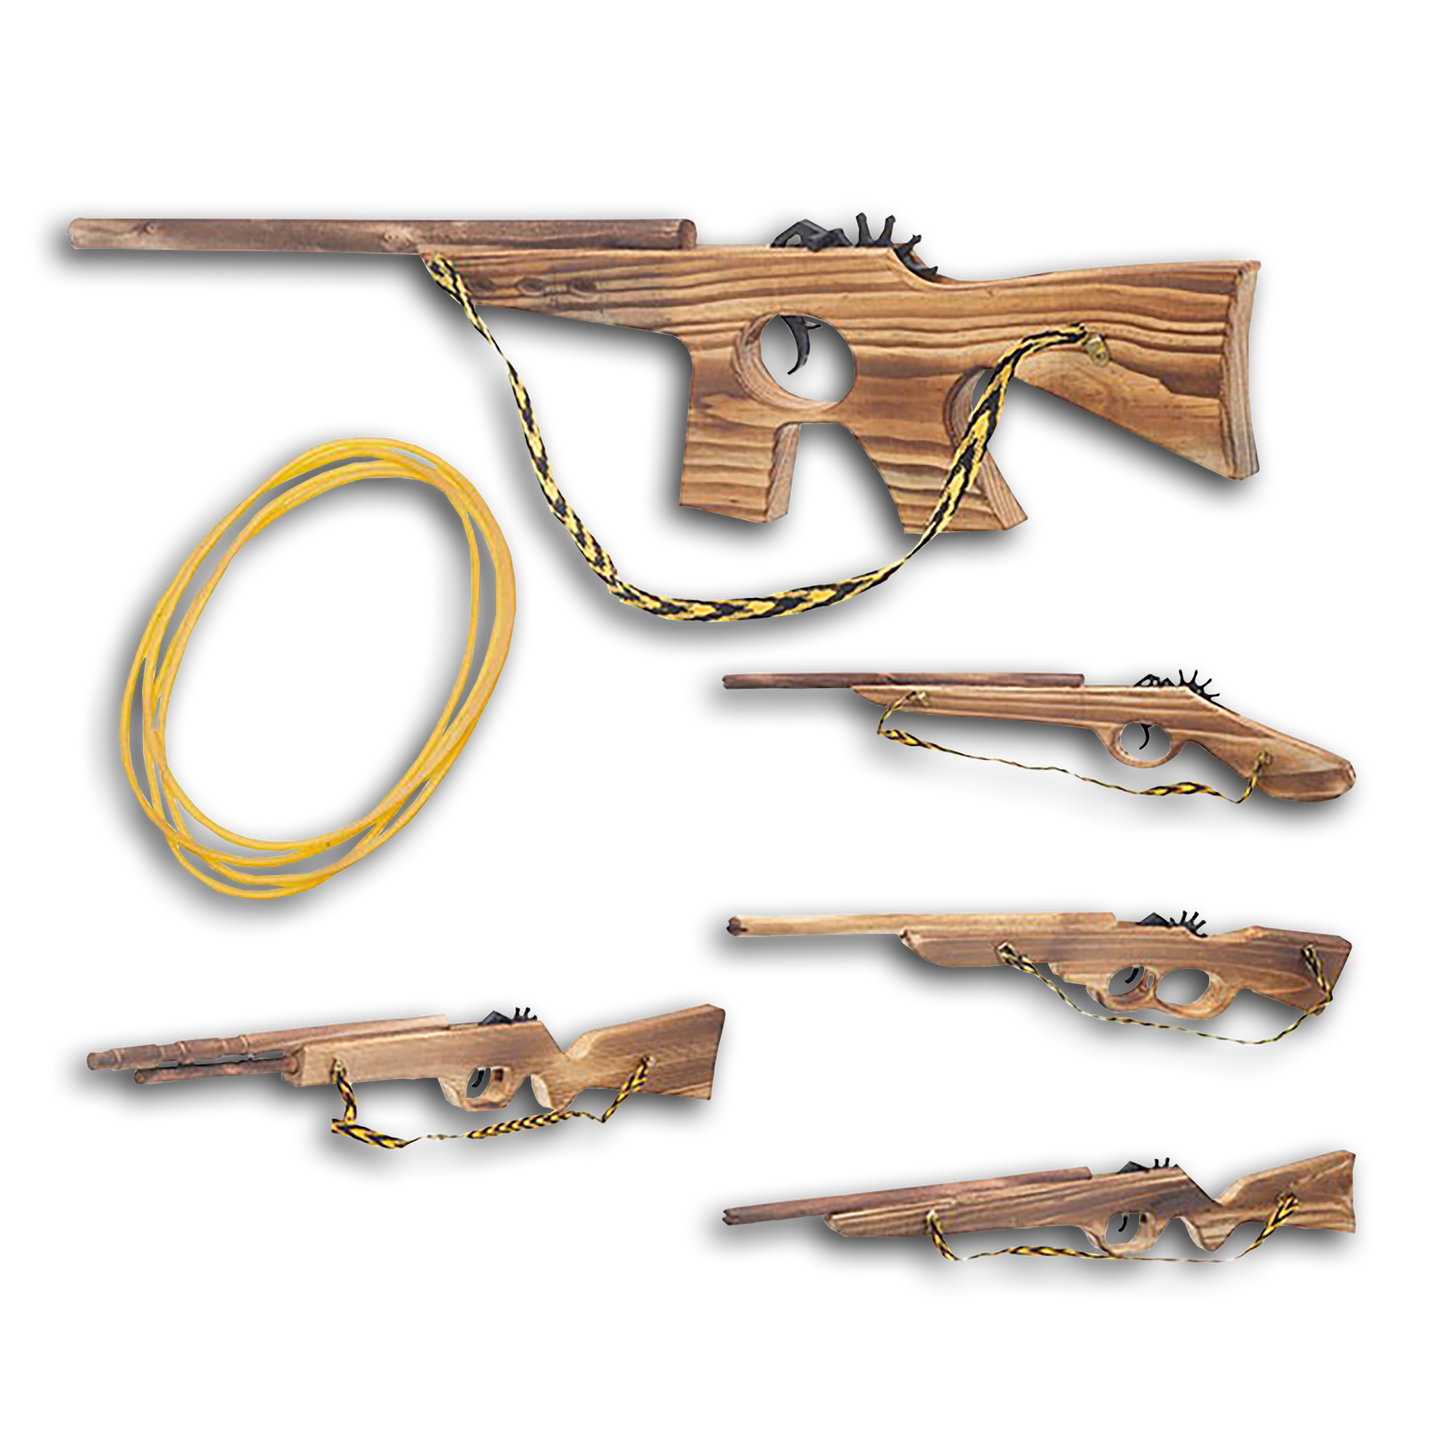 WOODEN RUBBER BAND RIFLE